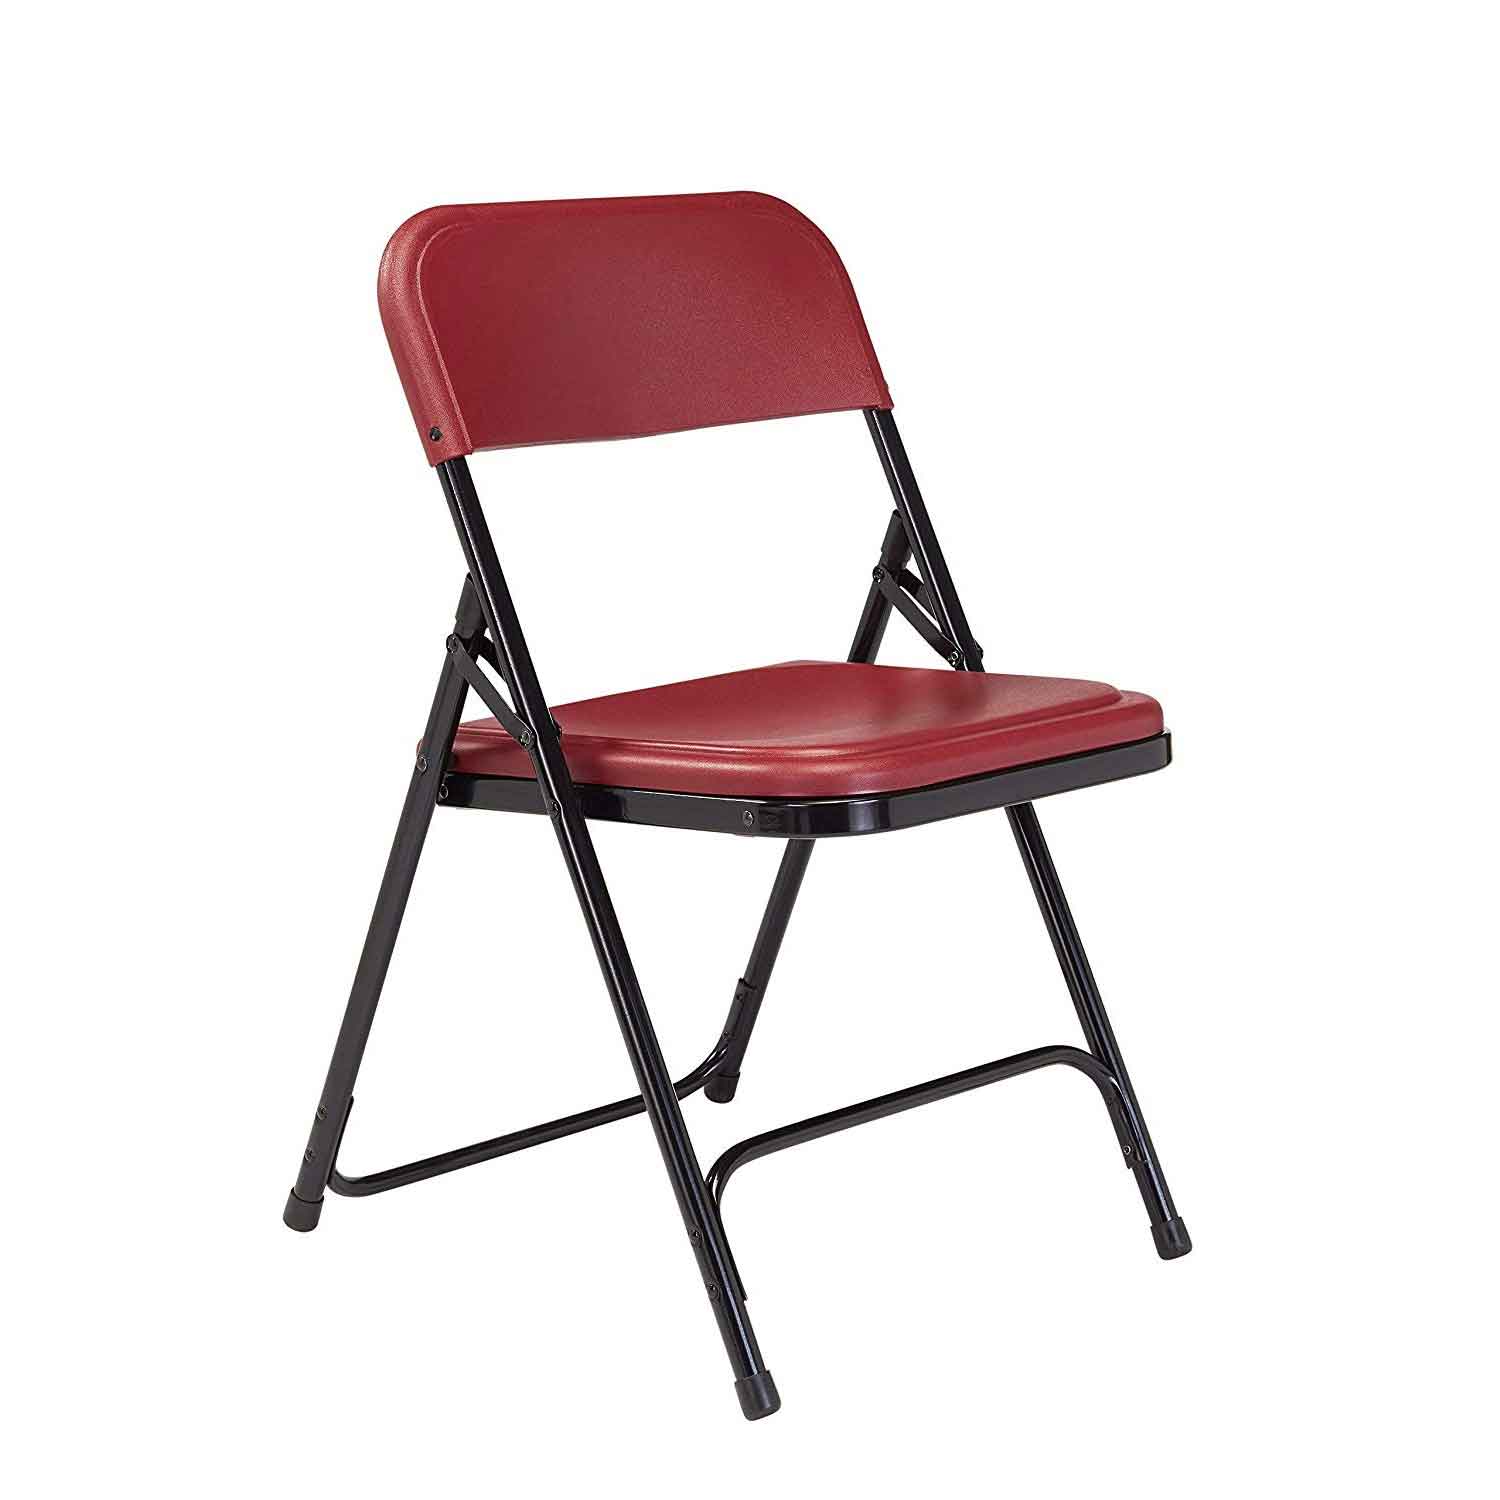 Premium Lightweight Folding Chair (Please order in multiples of 4)